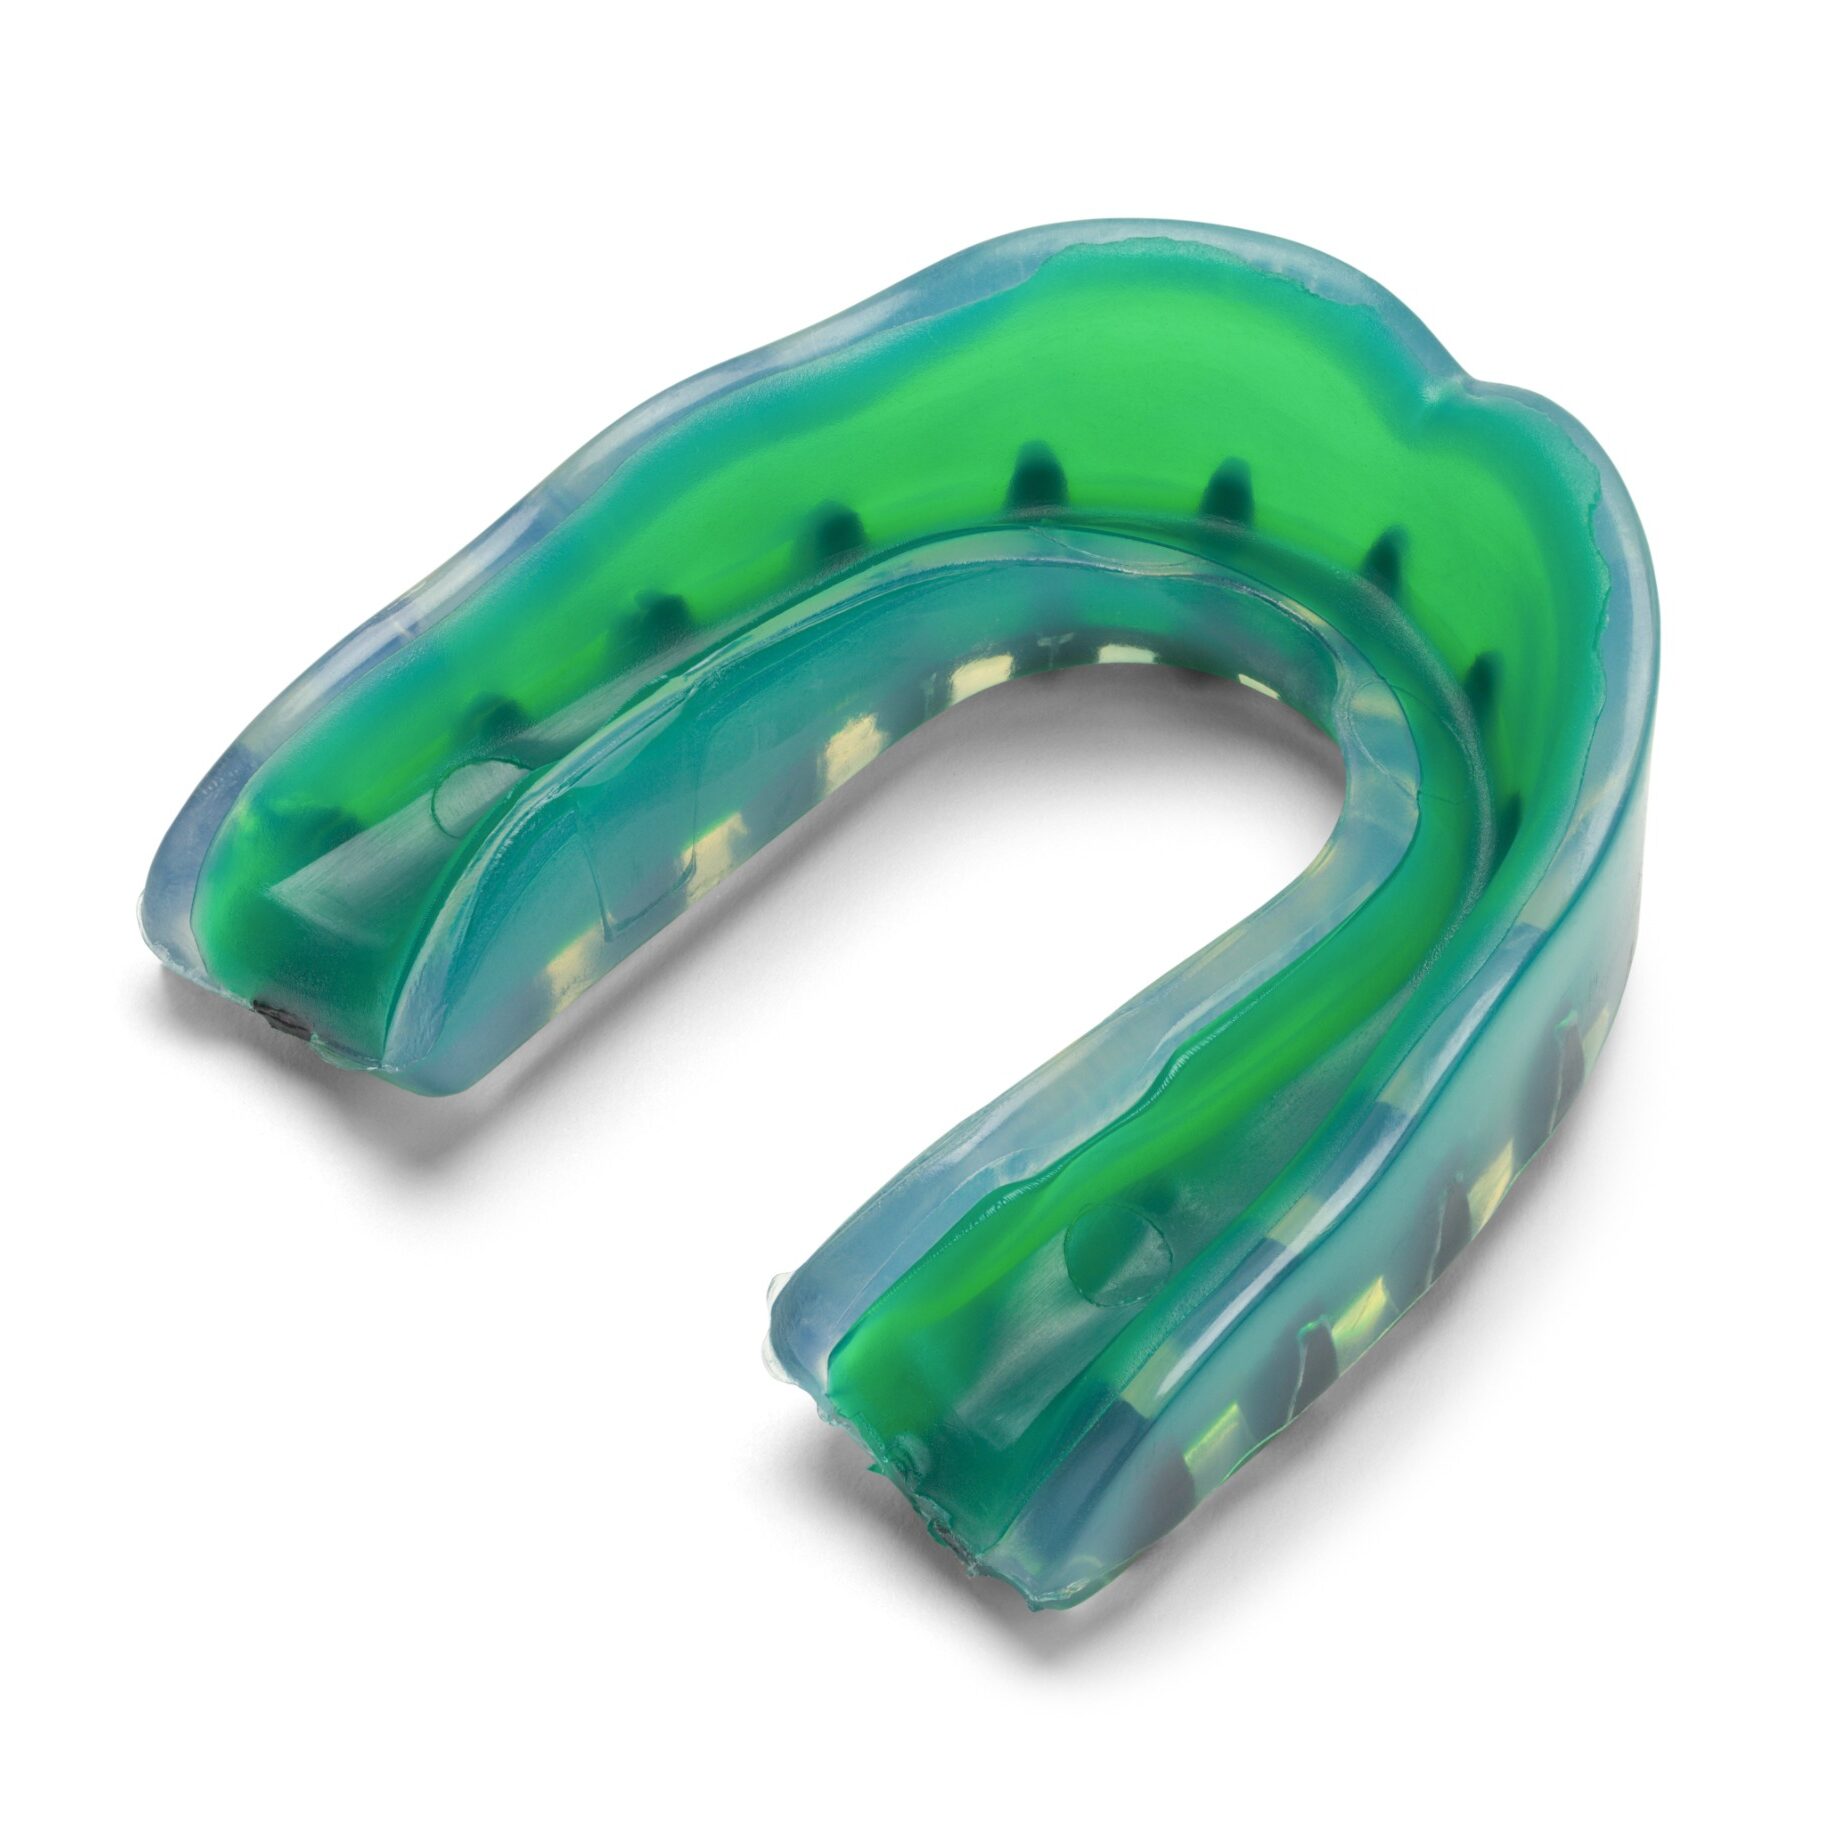 New Green Rubber Sports Mouthguard Isolated on White Background.